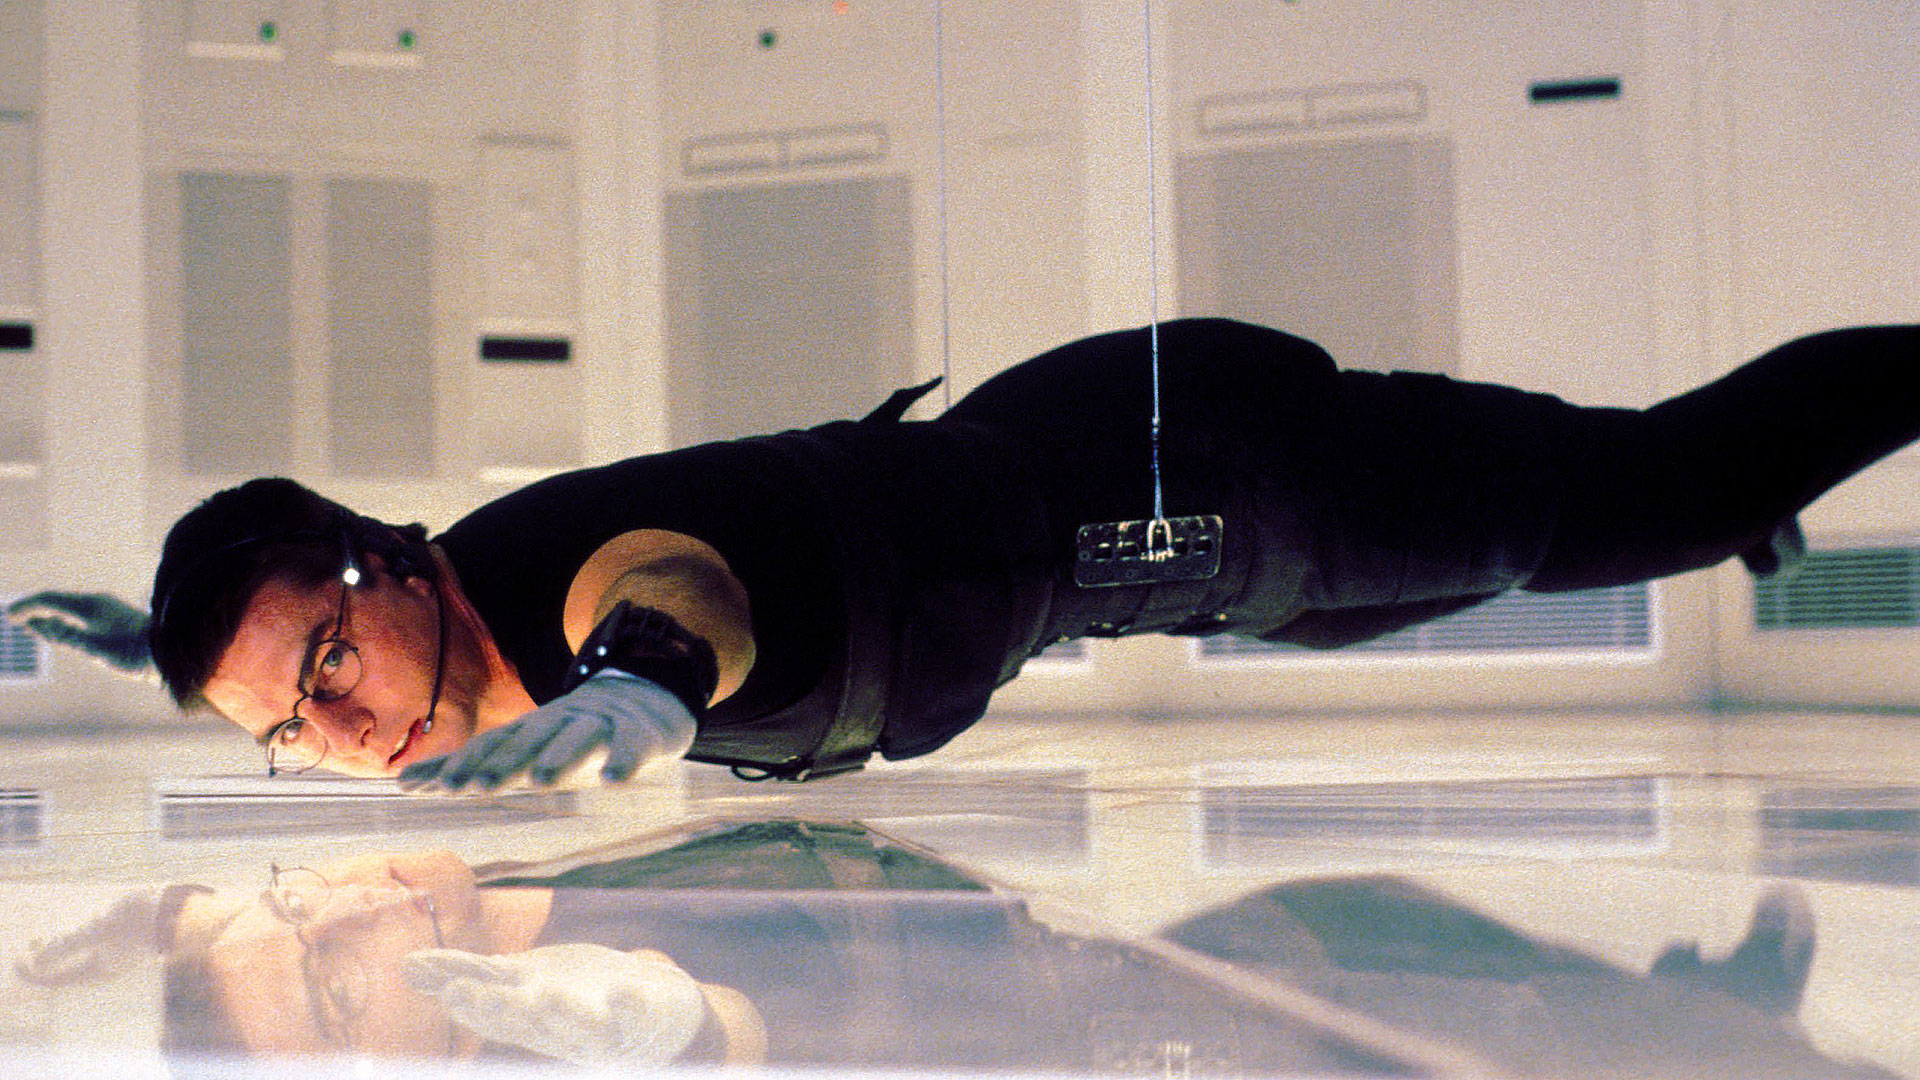 Movie Mission Impossible 1920x1080